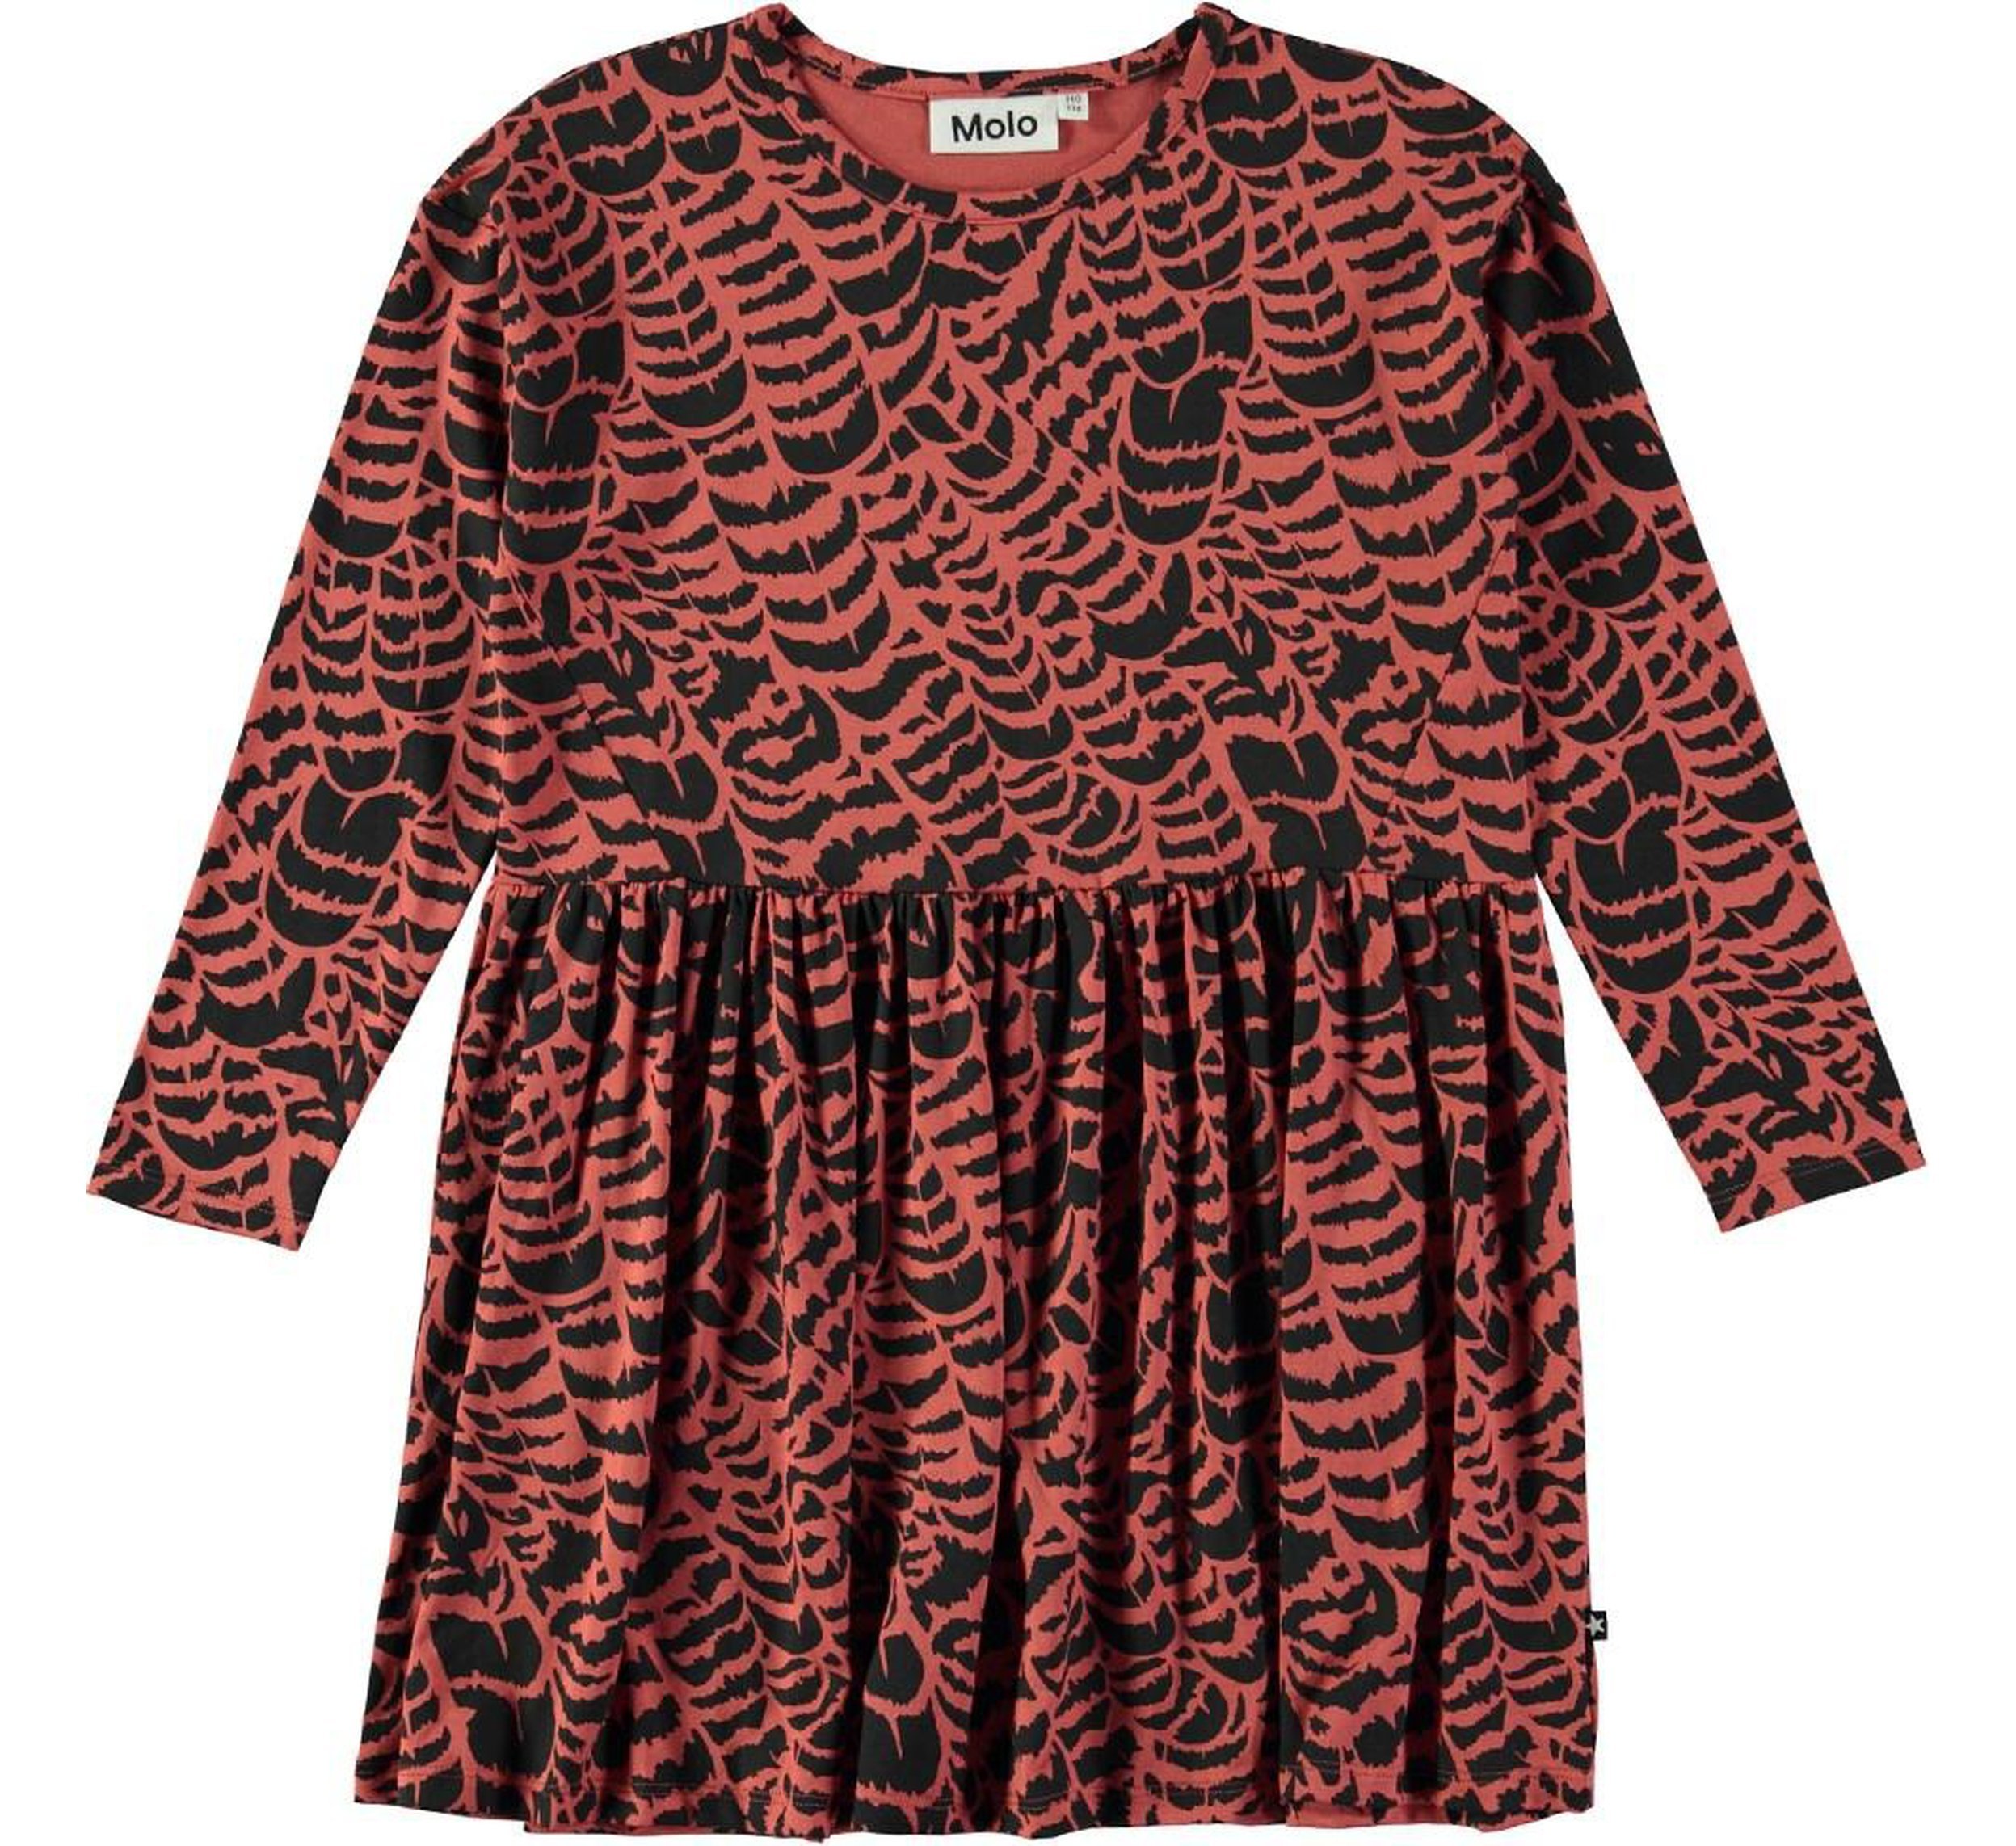 Robe plume graphique Carly-DRESS-MOLO-98/104 - 3/4 ans-jellyfishkids.com.cy